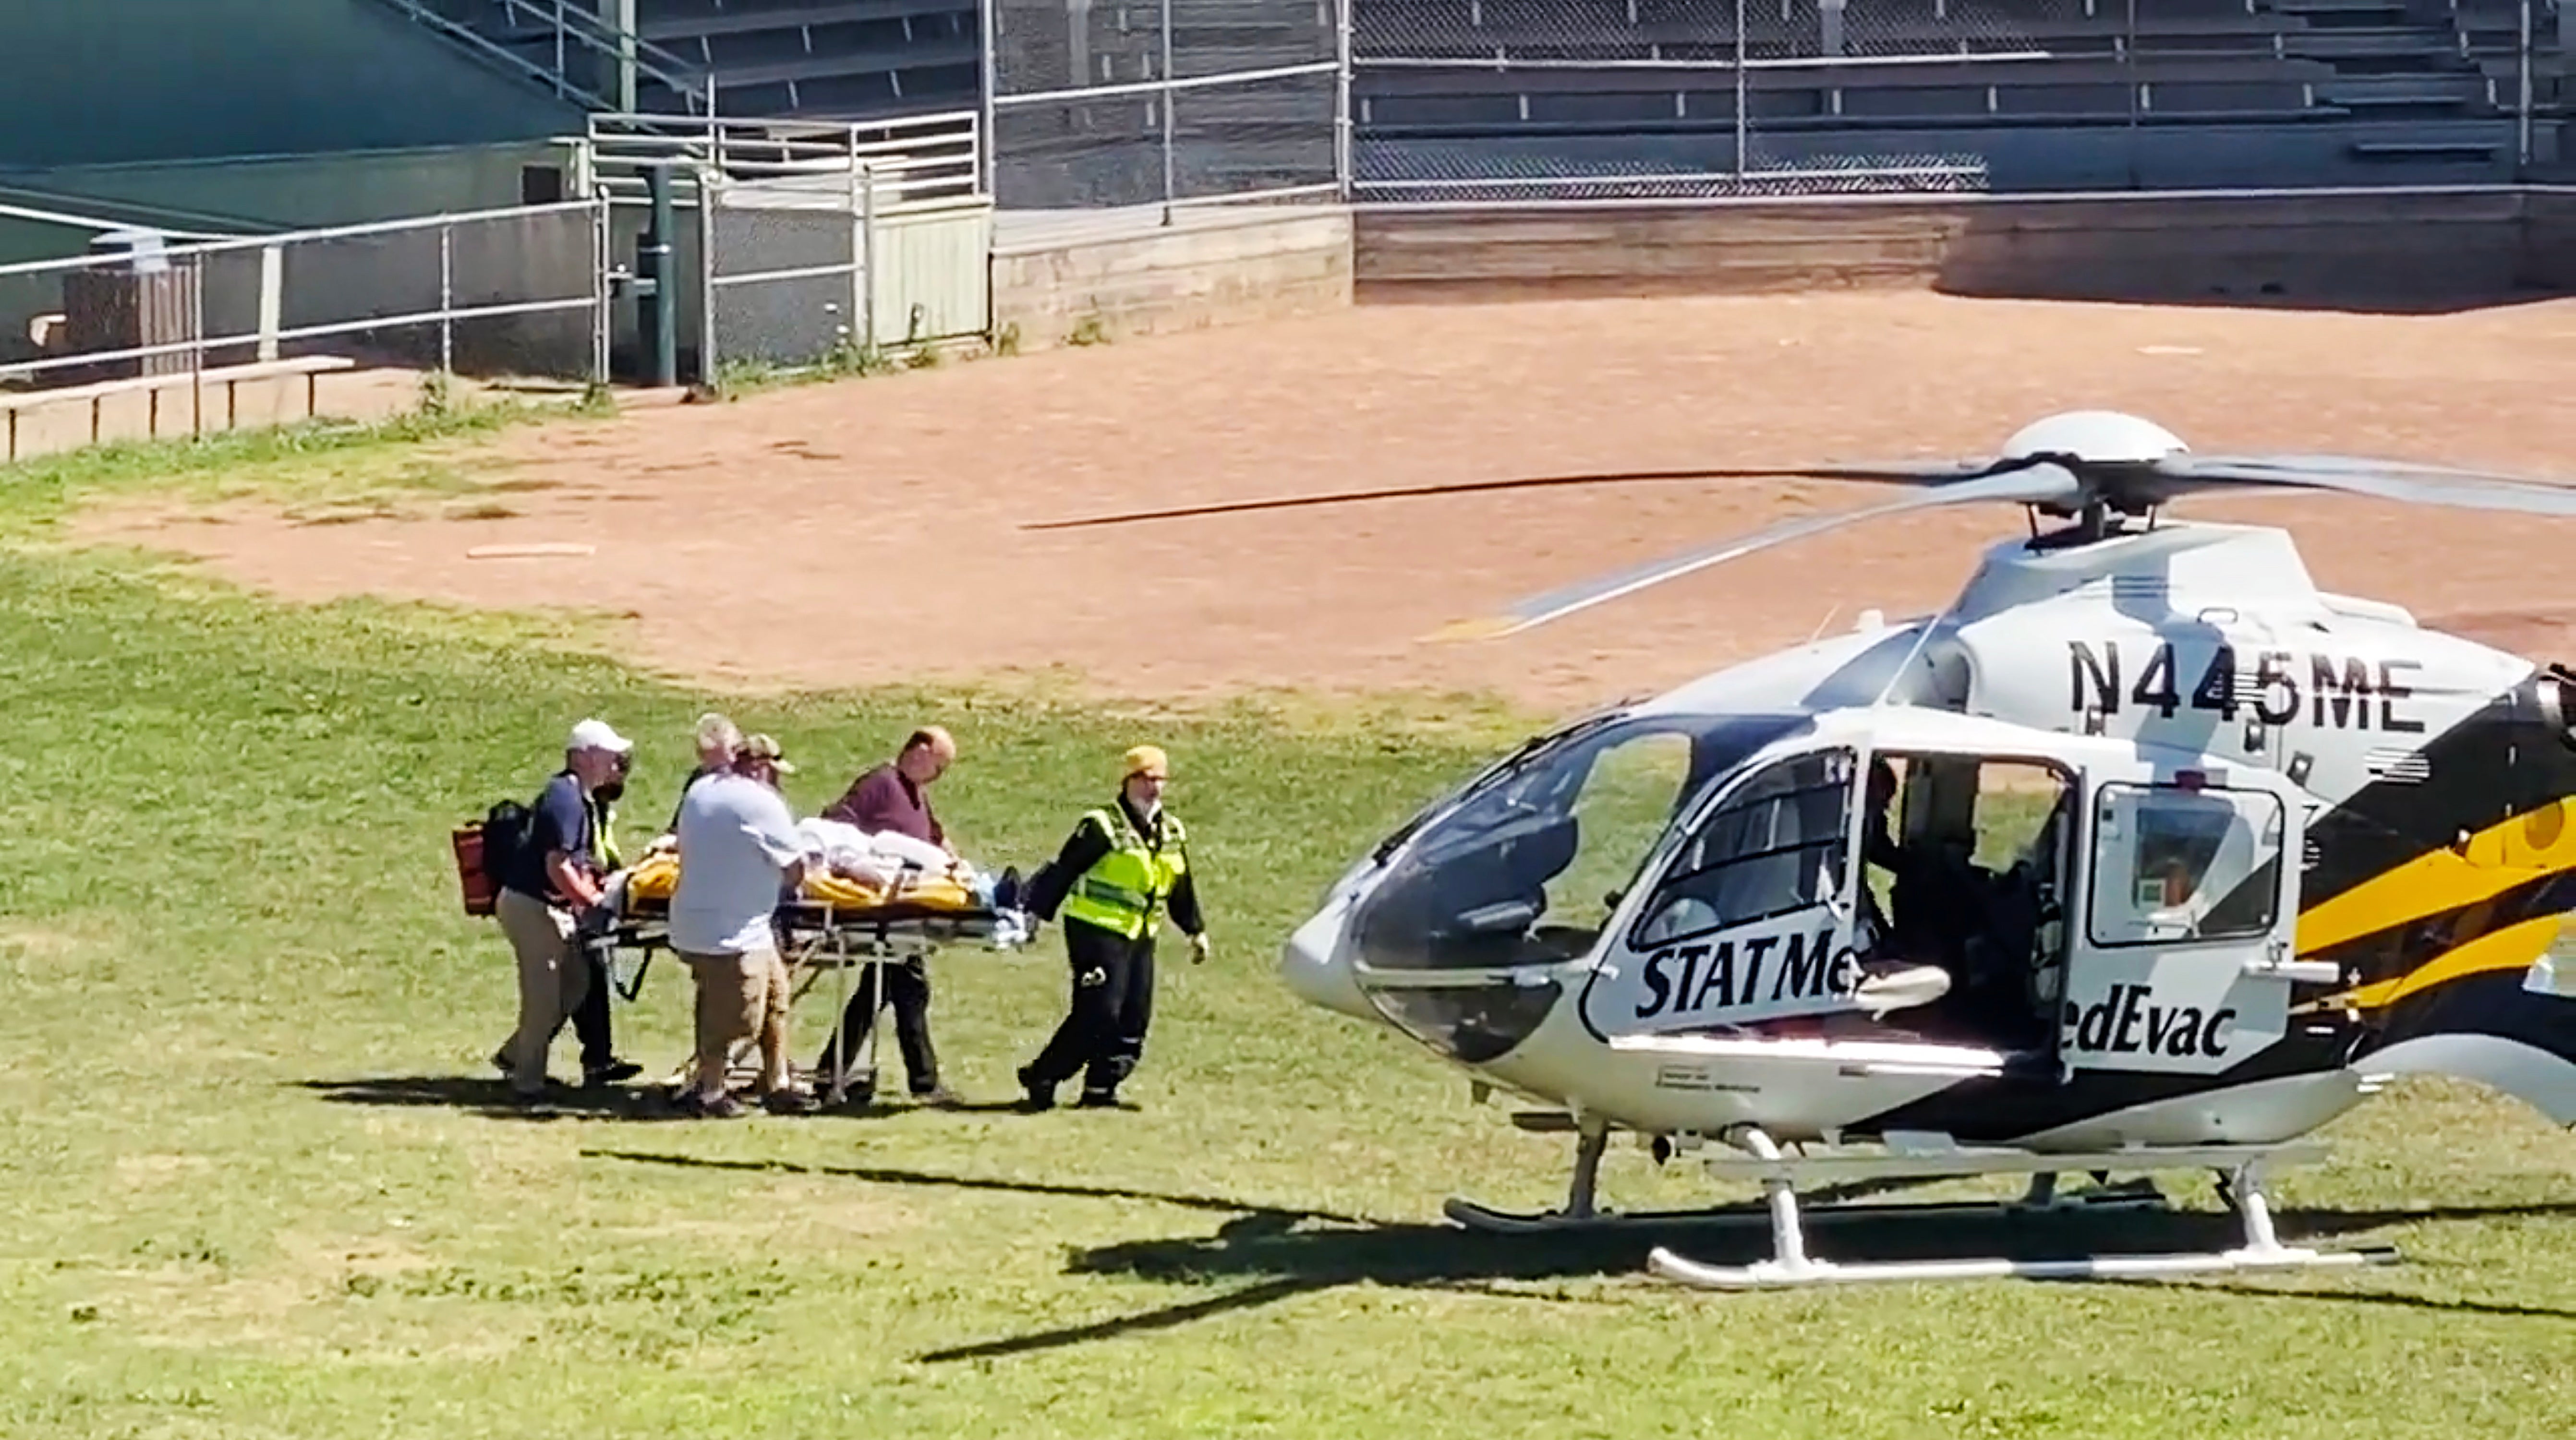 Salman Rushdie being loaded into a MedEvac helicopter